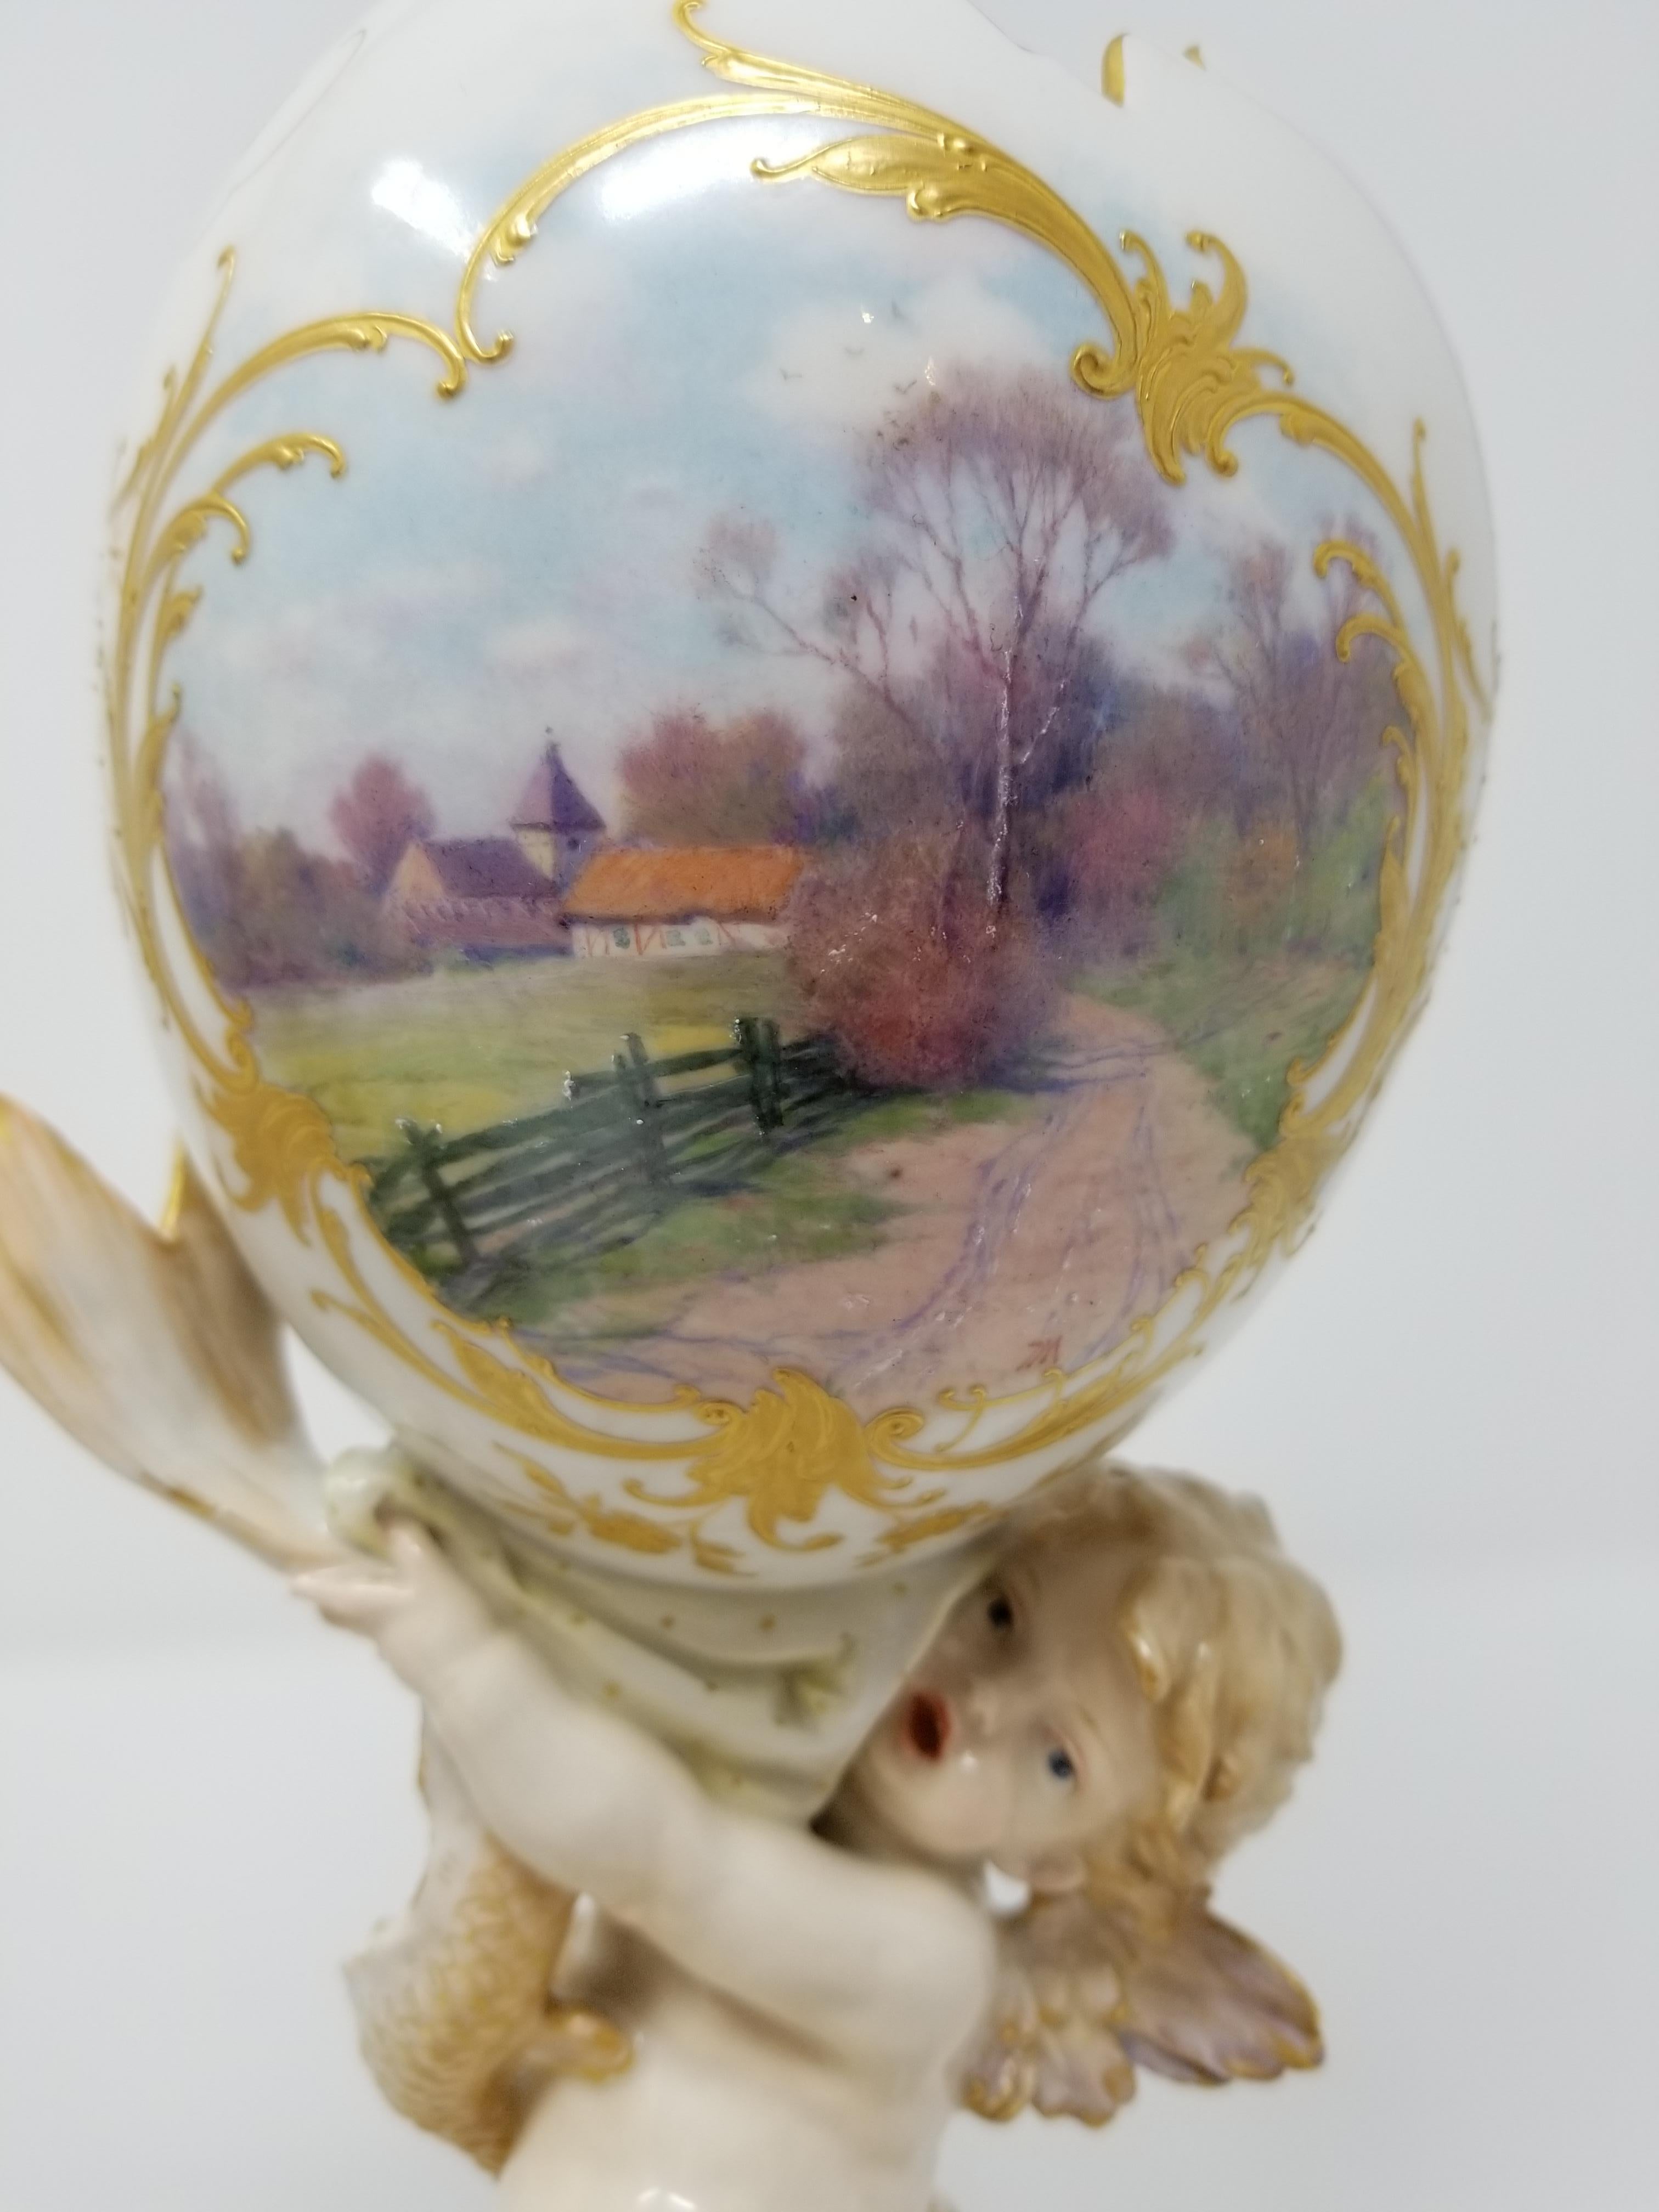 Late 19th Century Berlin KPM Figural Porcelain Egg Shaped Weichmalerei Vases